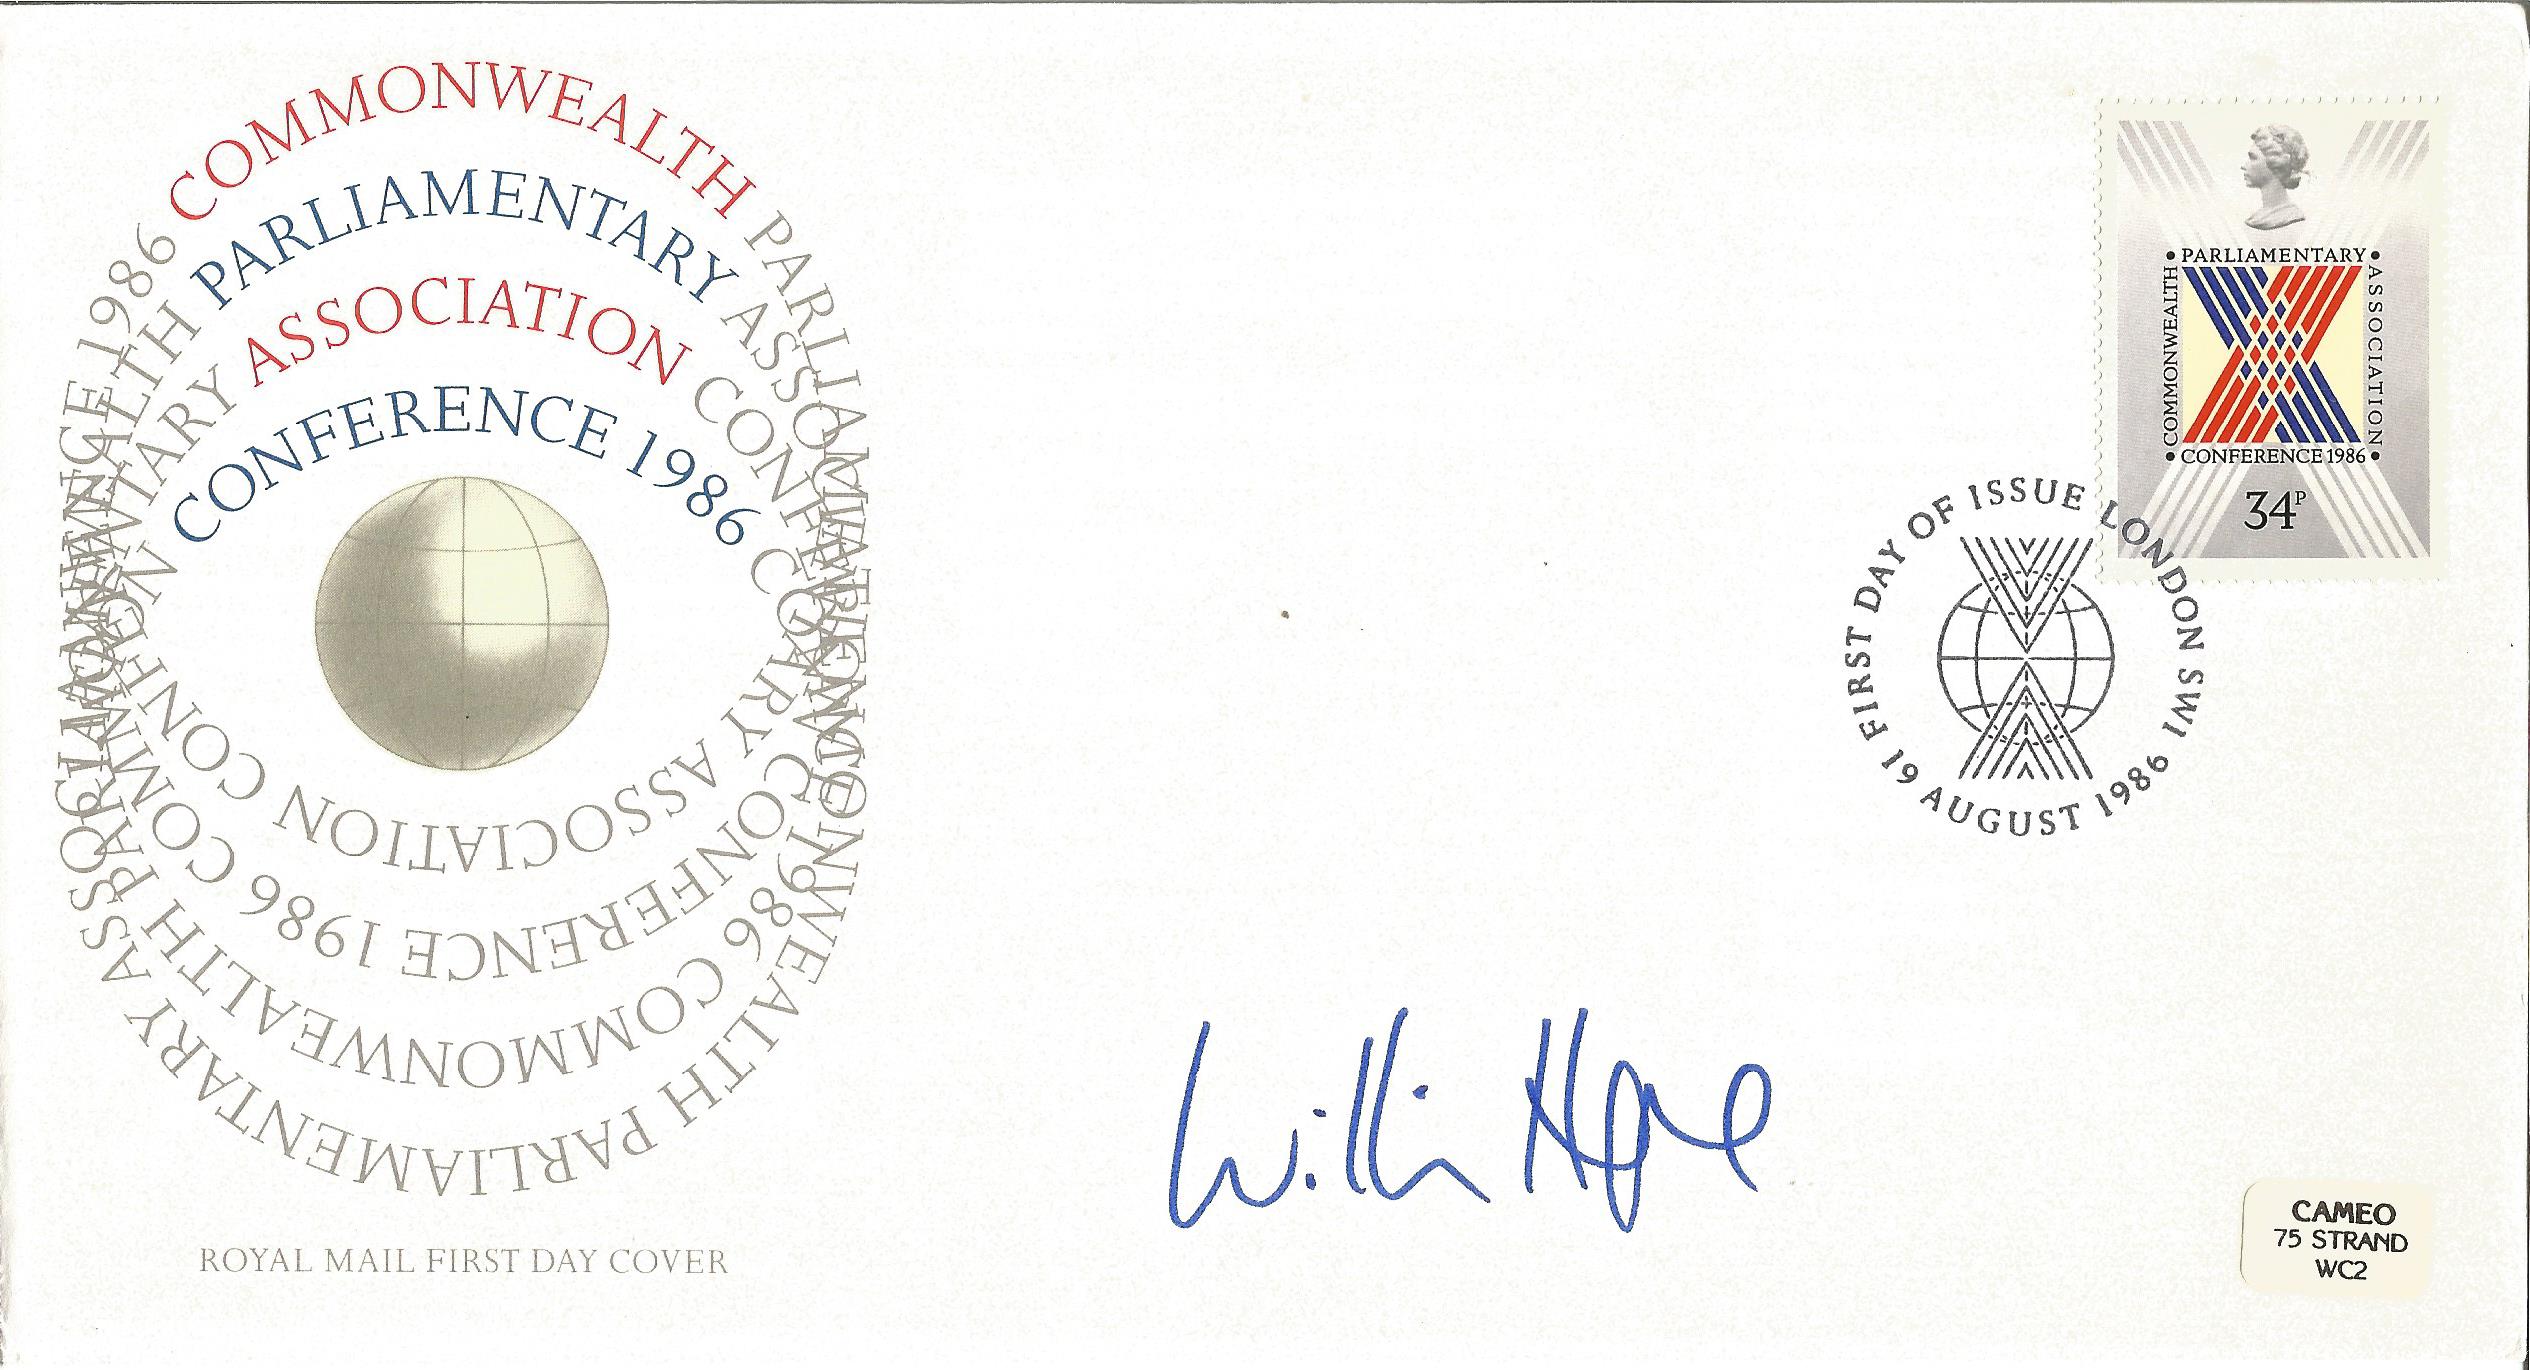 William Hague signed Parliamentary Association Conference FDC. 19/8/86 London SW1 FDI postmark. Good